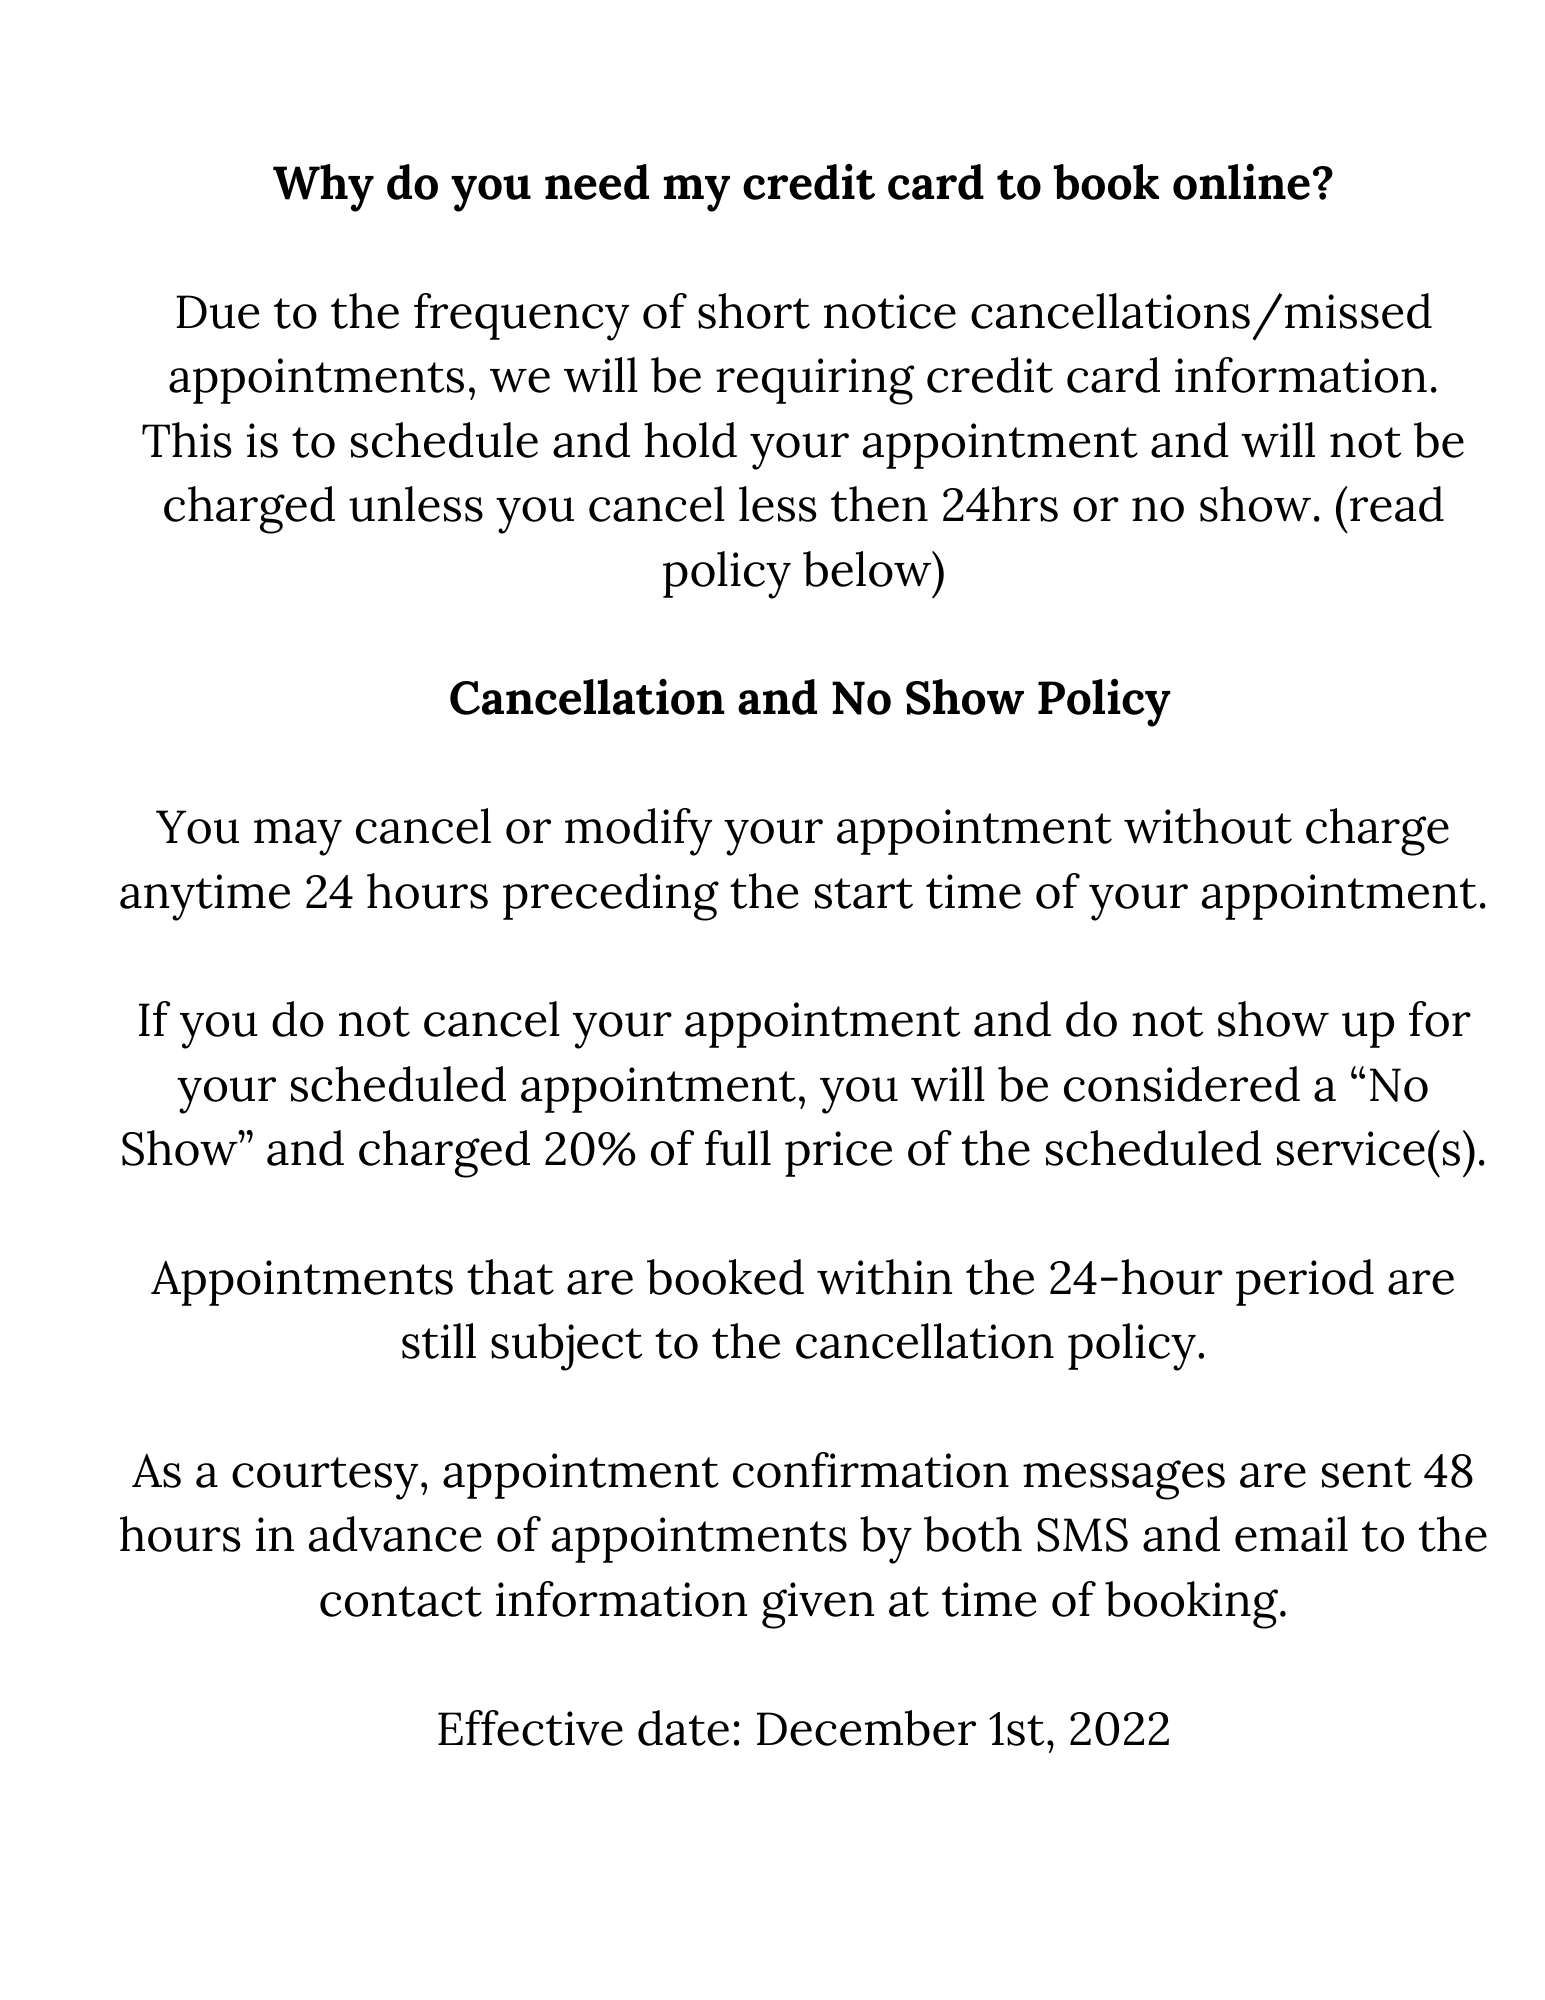 Cancellation and No Show Policy You may cancel or modify your appointment without charge anytime 24 hours preceding the start time of your appointment. If you do not cancel your appointment and do not show up for y.png